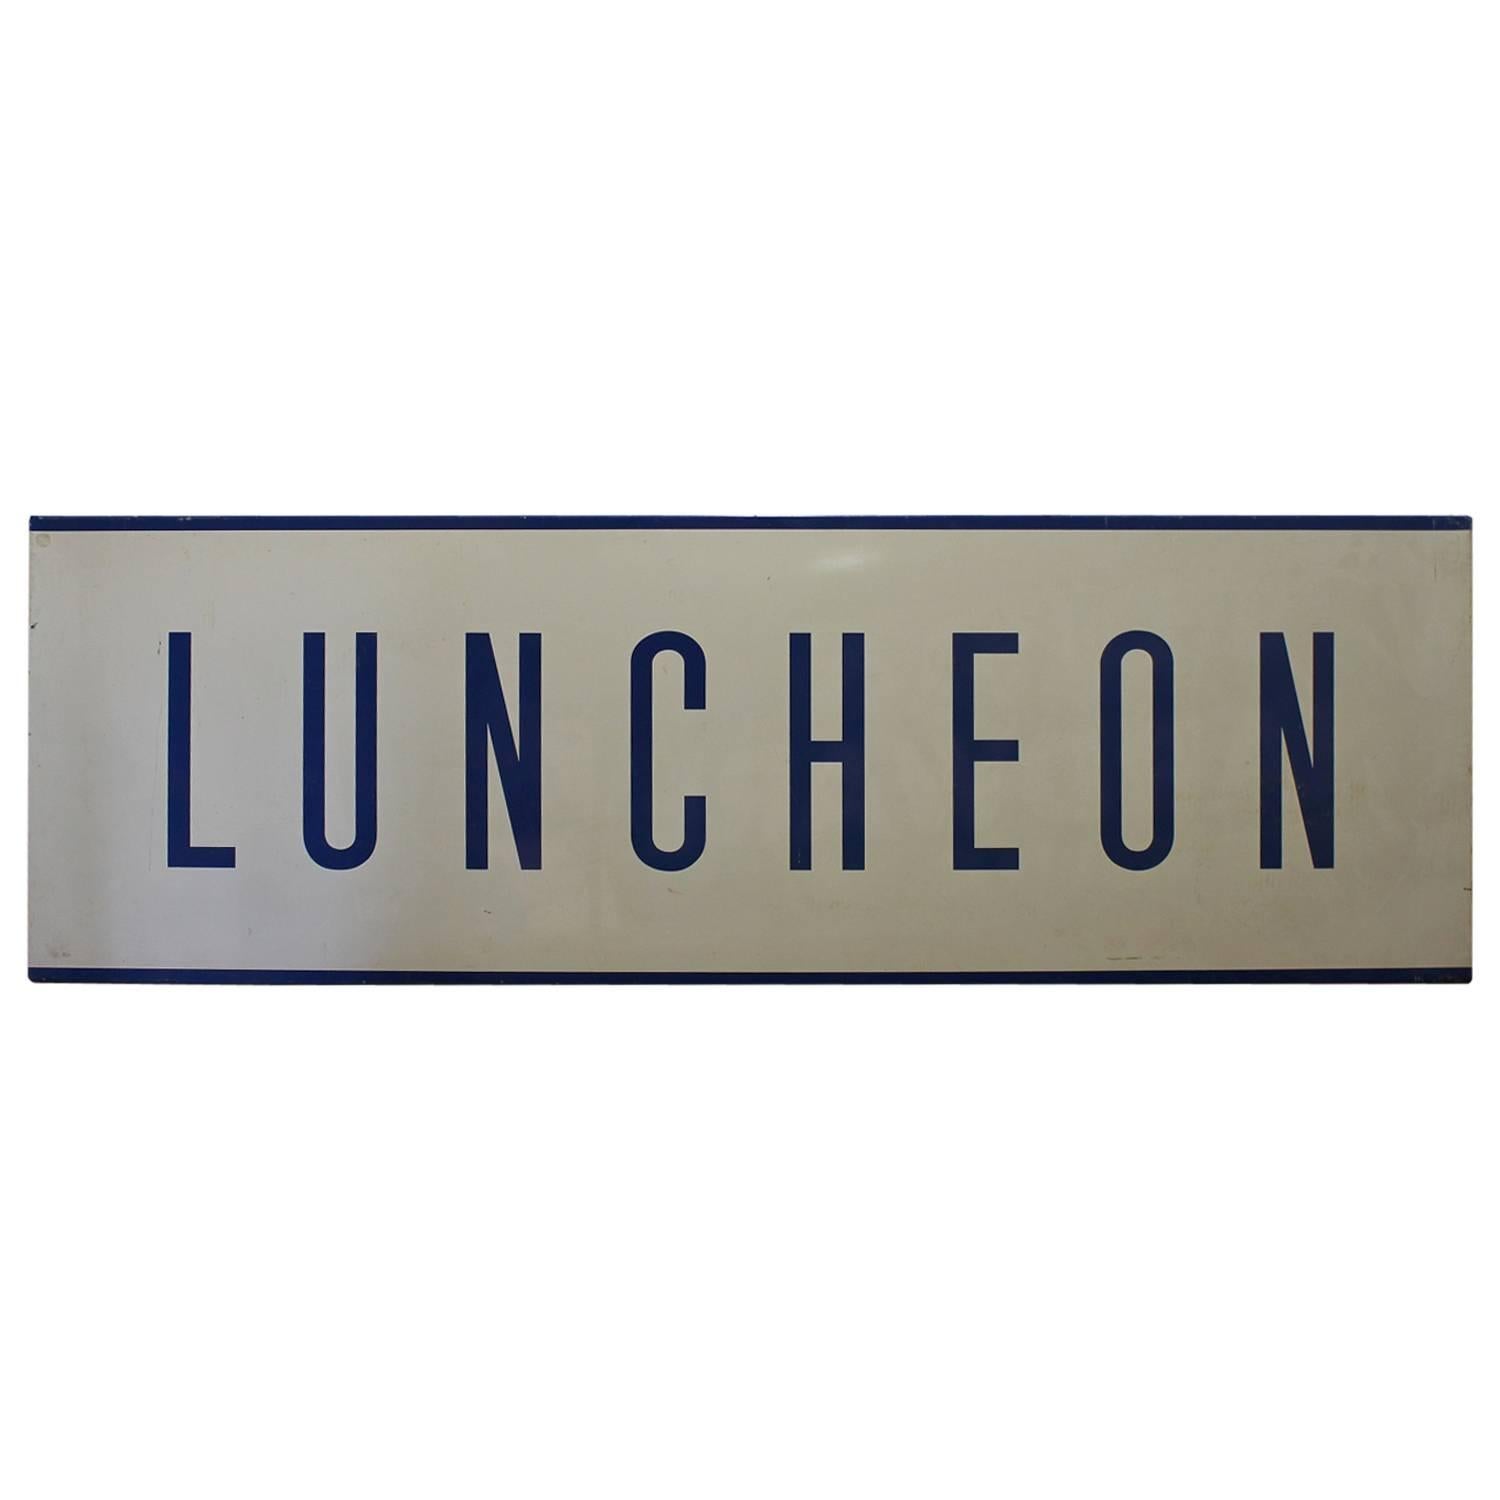 1950s Enamel Sign "Luncheon" For Sale